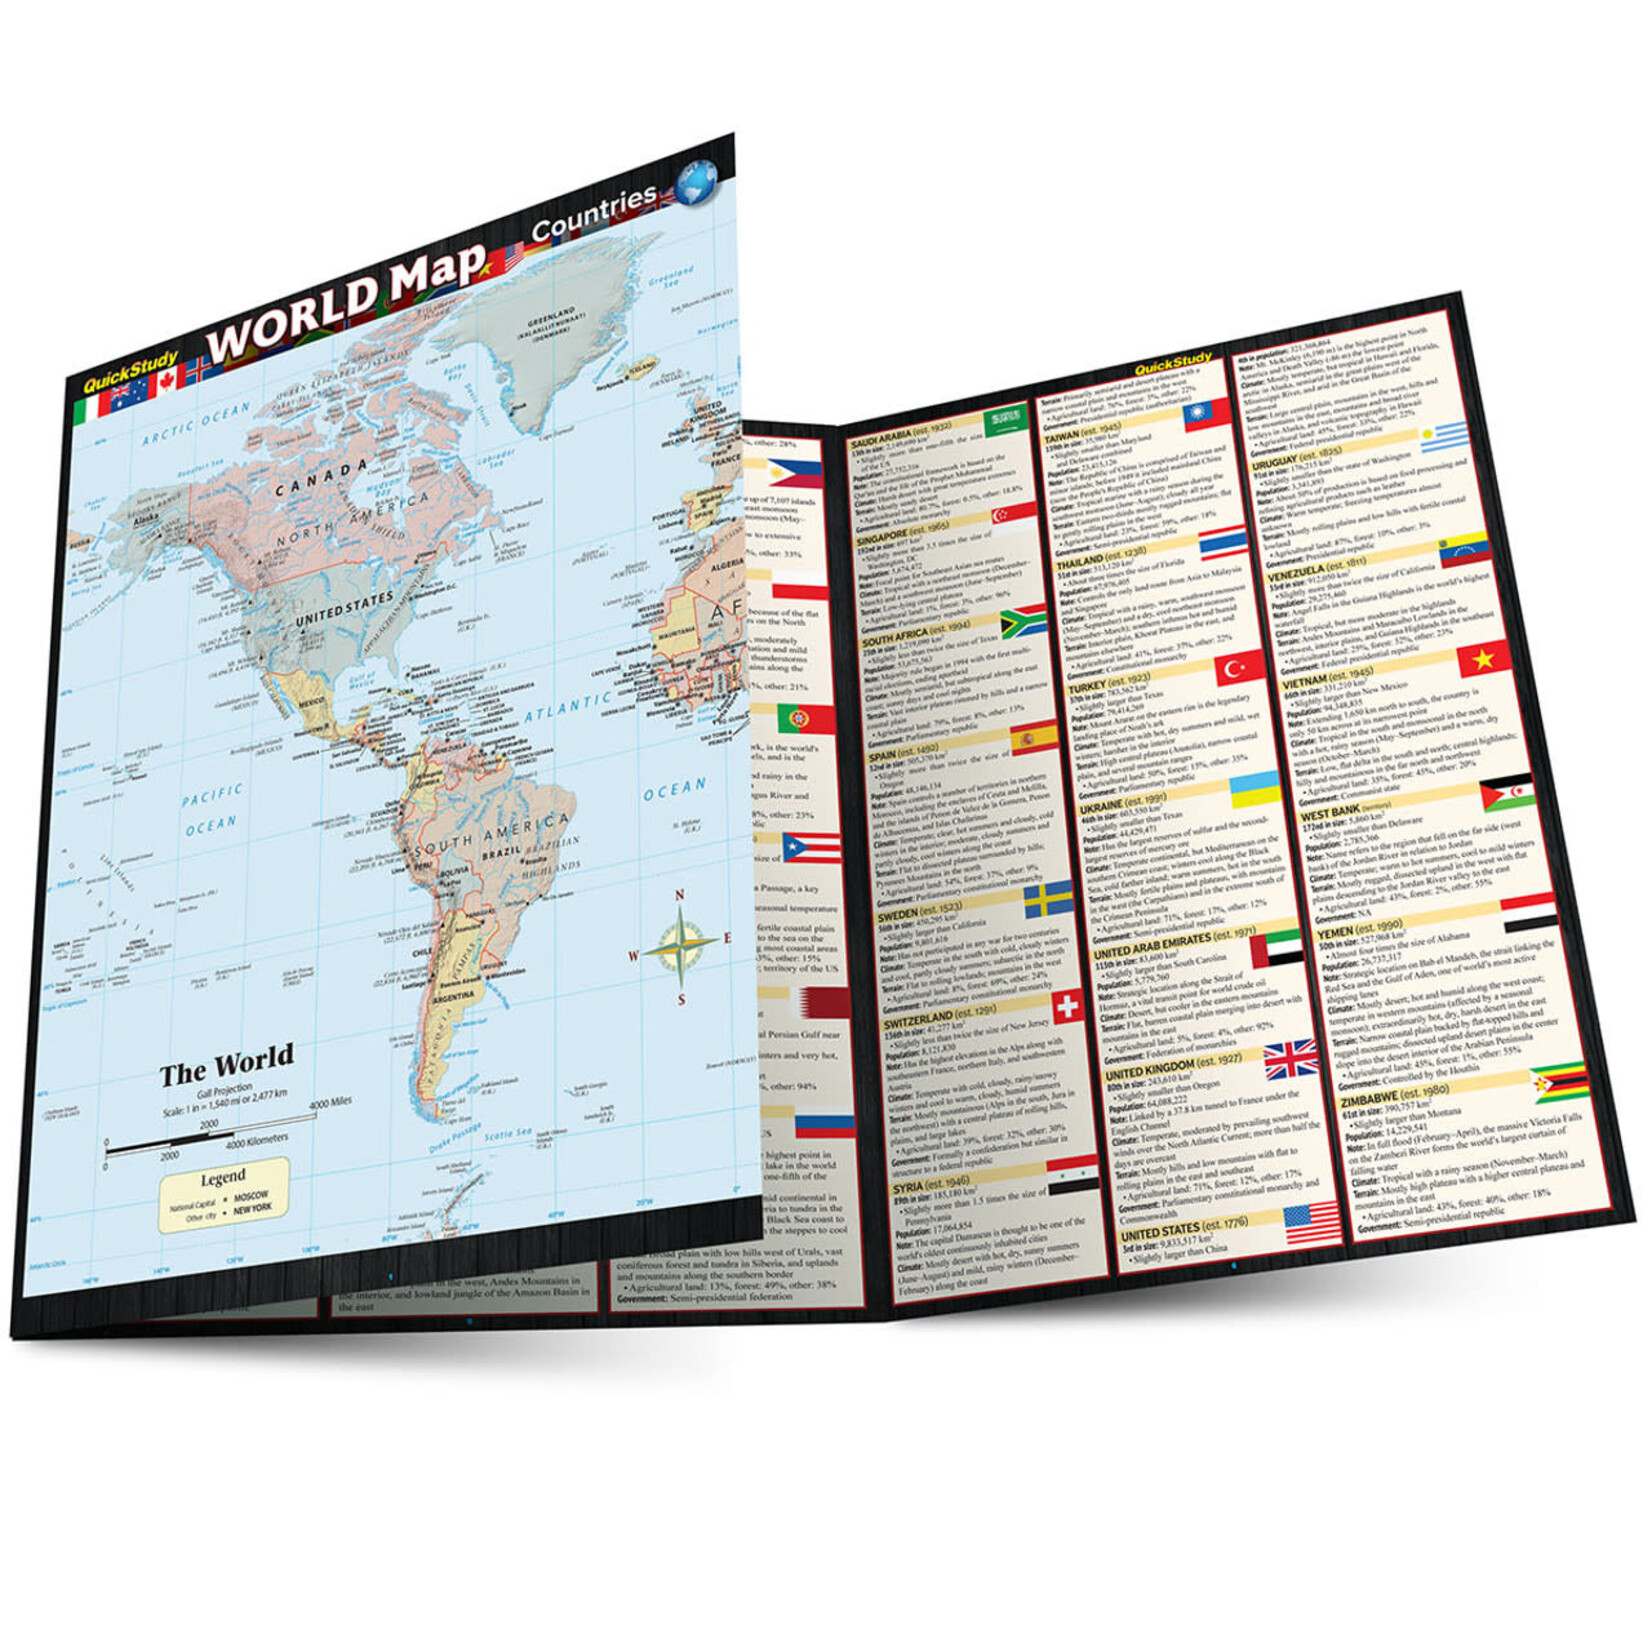 BAR CHARTS QuickStudy | World Map: Countries Laminated Reference Guide